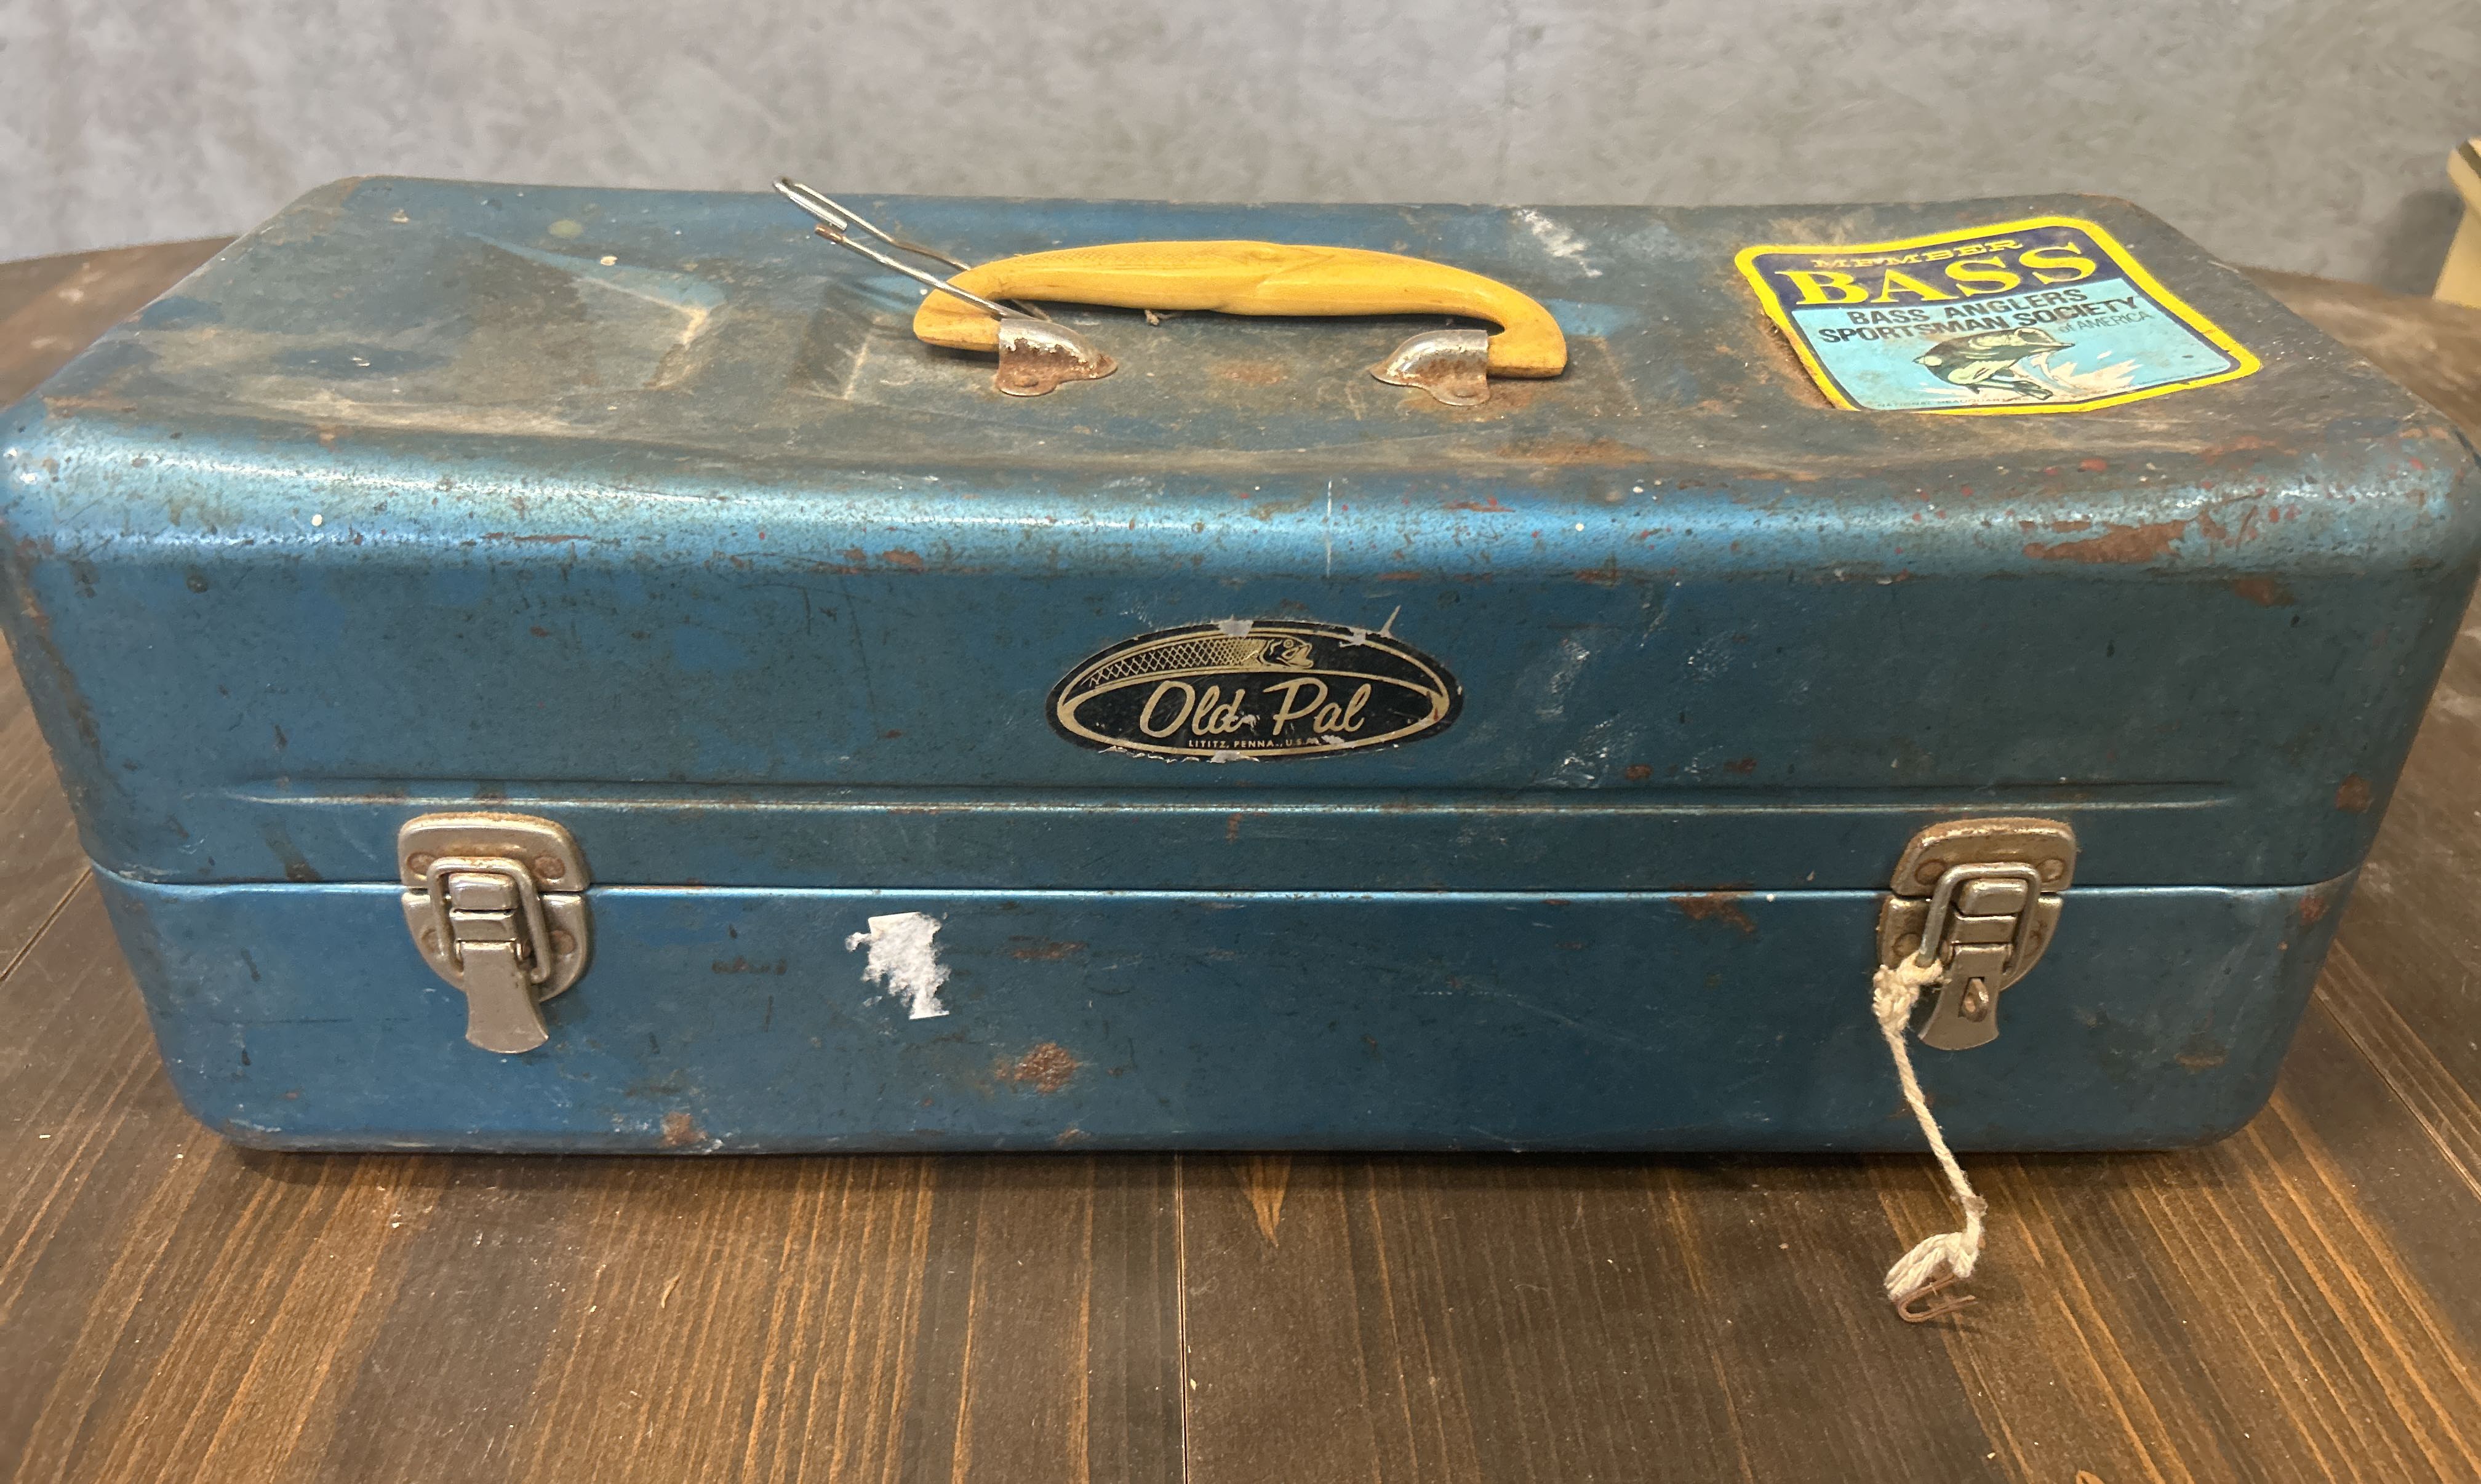 Lot - 2 drawer wooden tackle box loaded with lures and fishing supplies. Box  measures 22” x 11” x 6.5”.